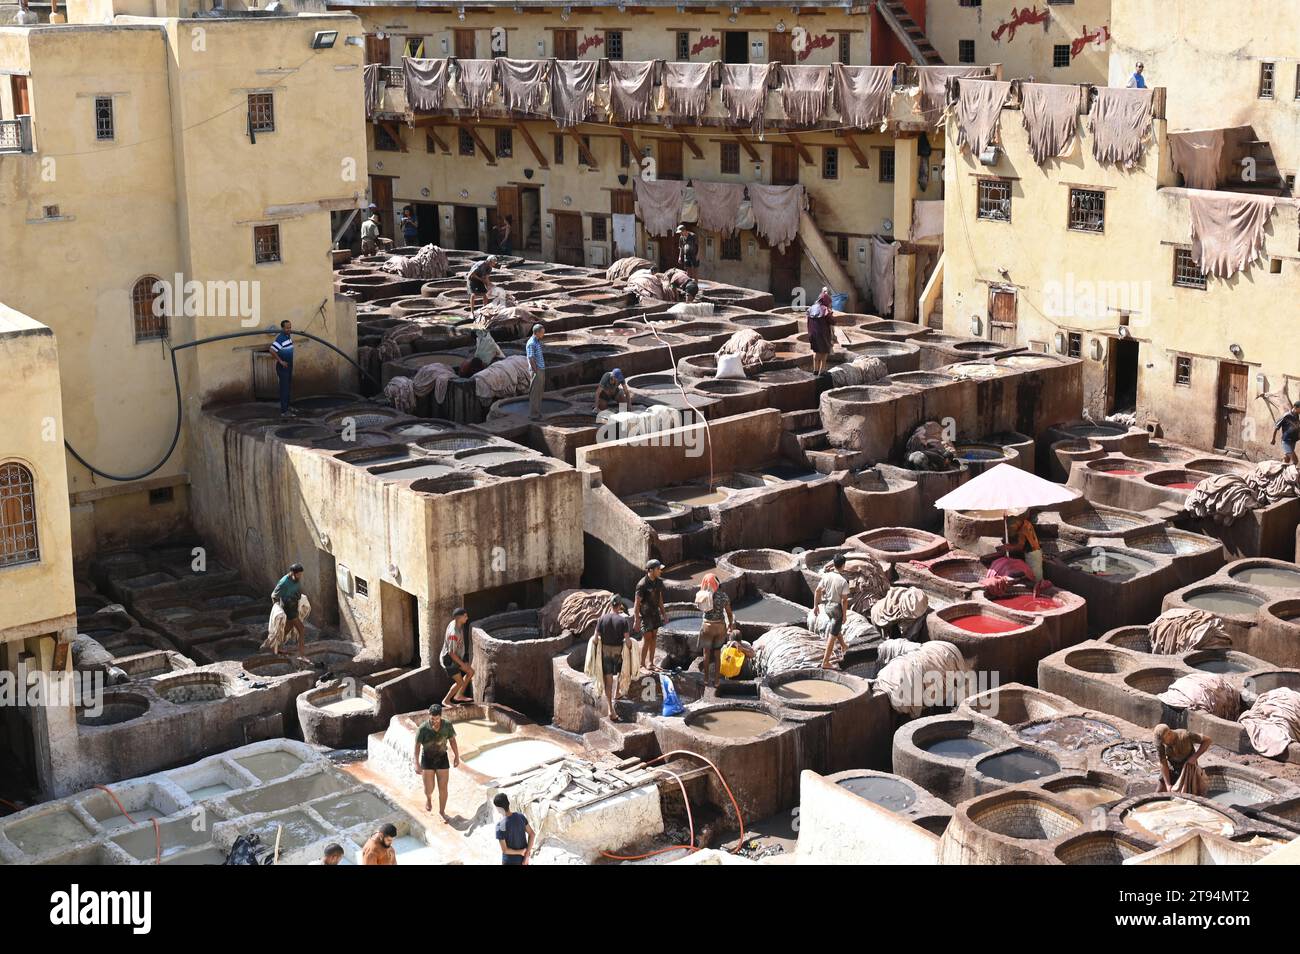 Historic tanners' district in Fez: Hard work in brick basins Stock Photo